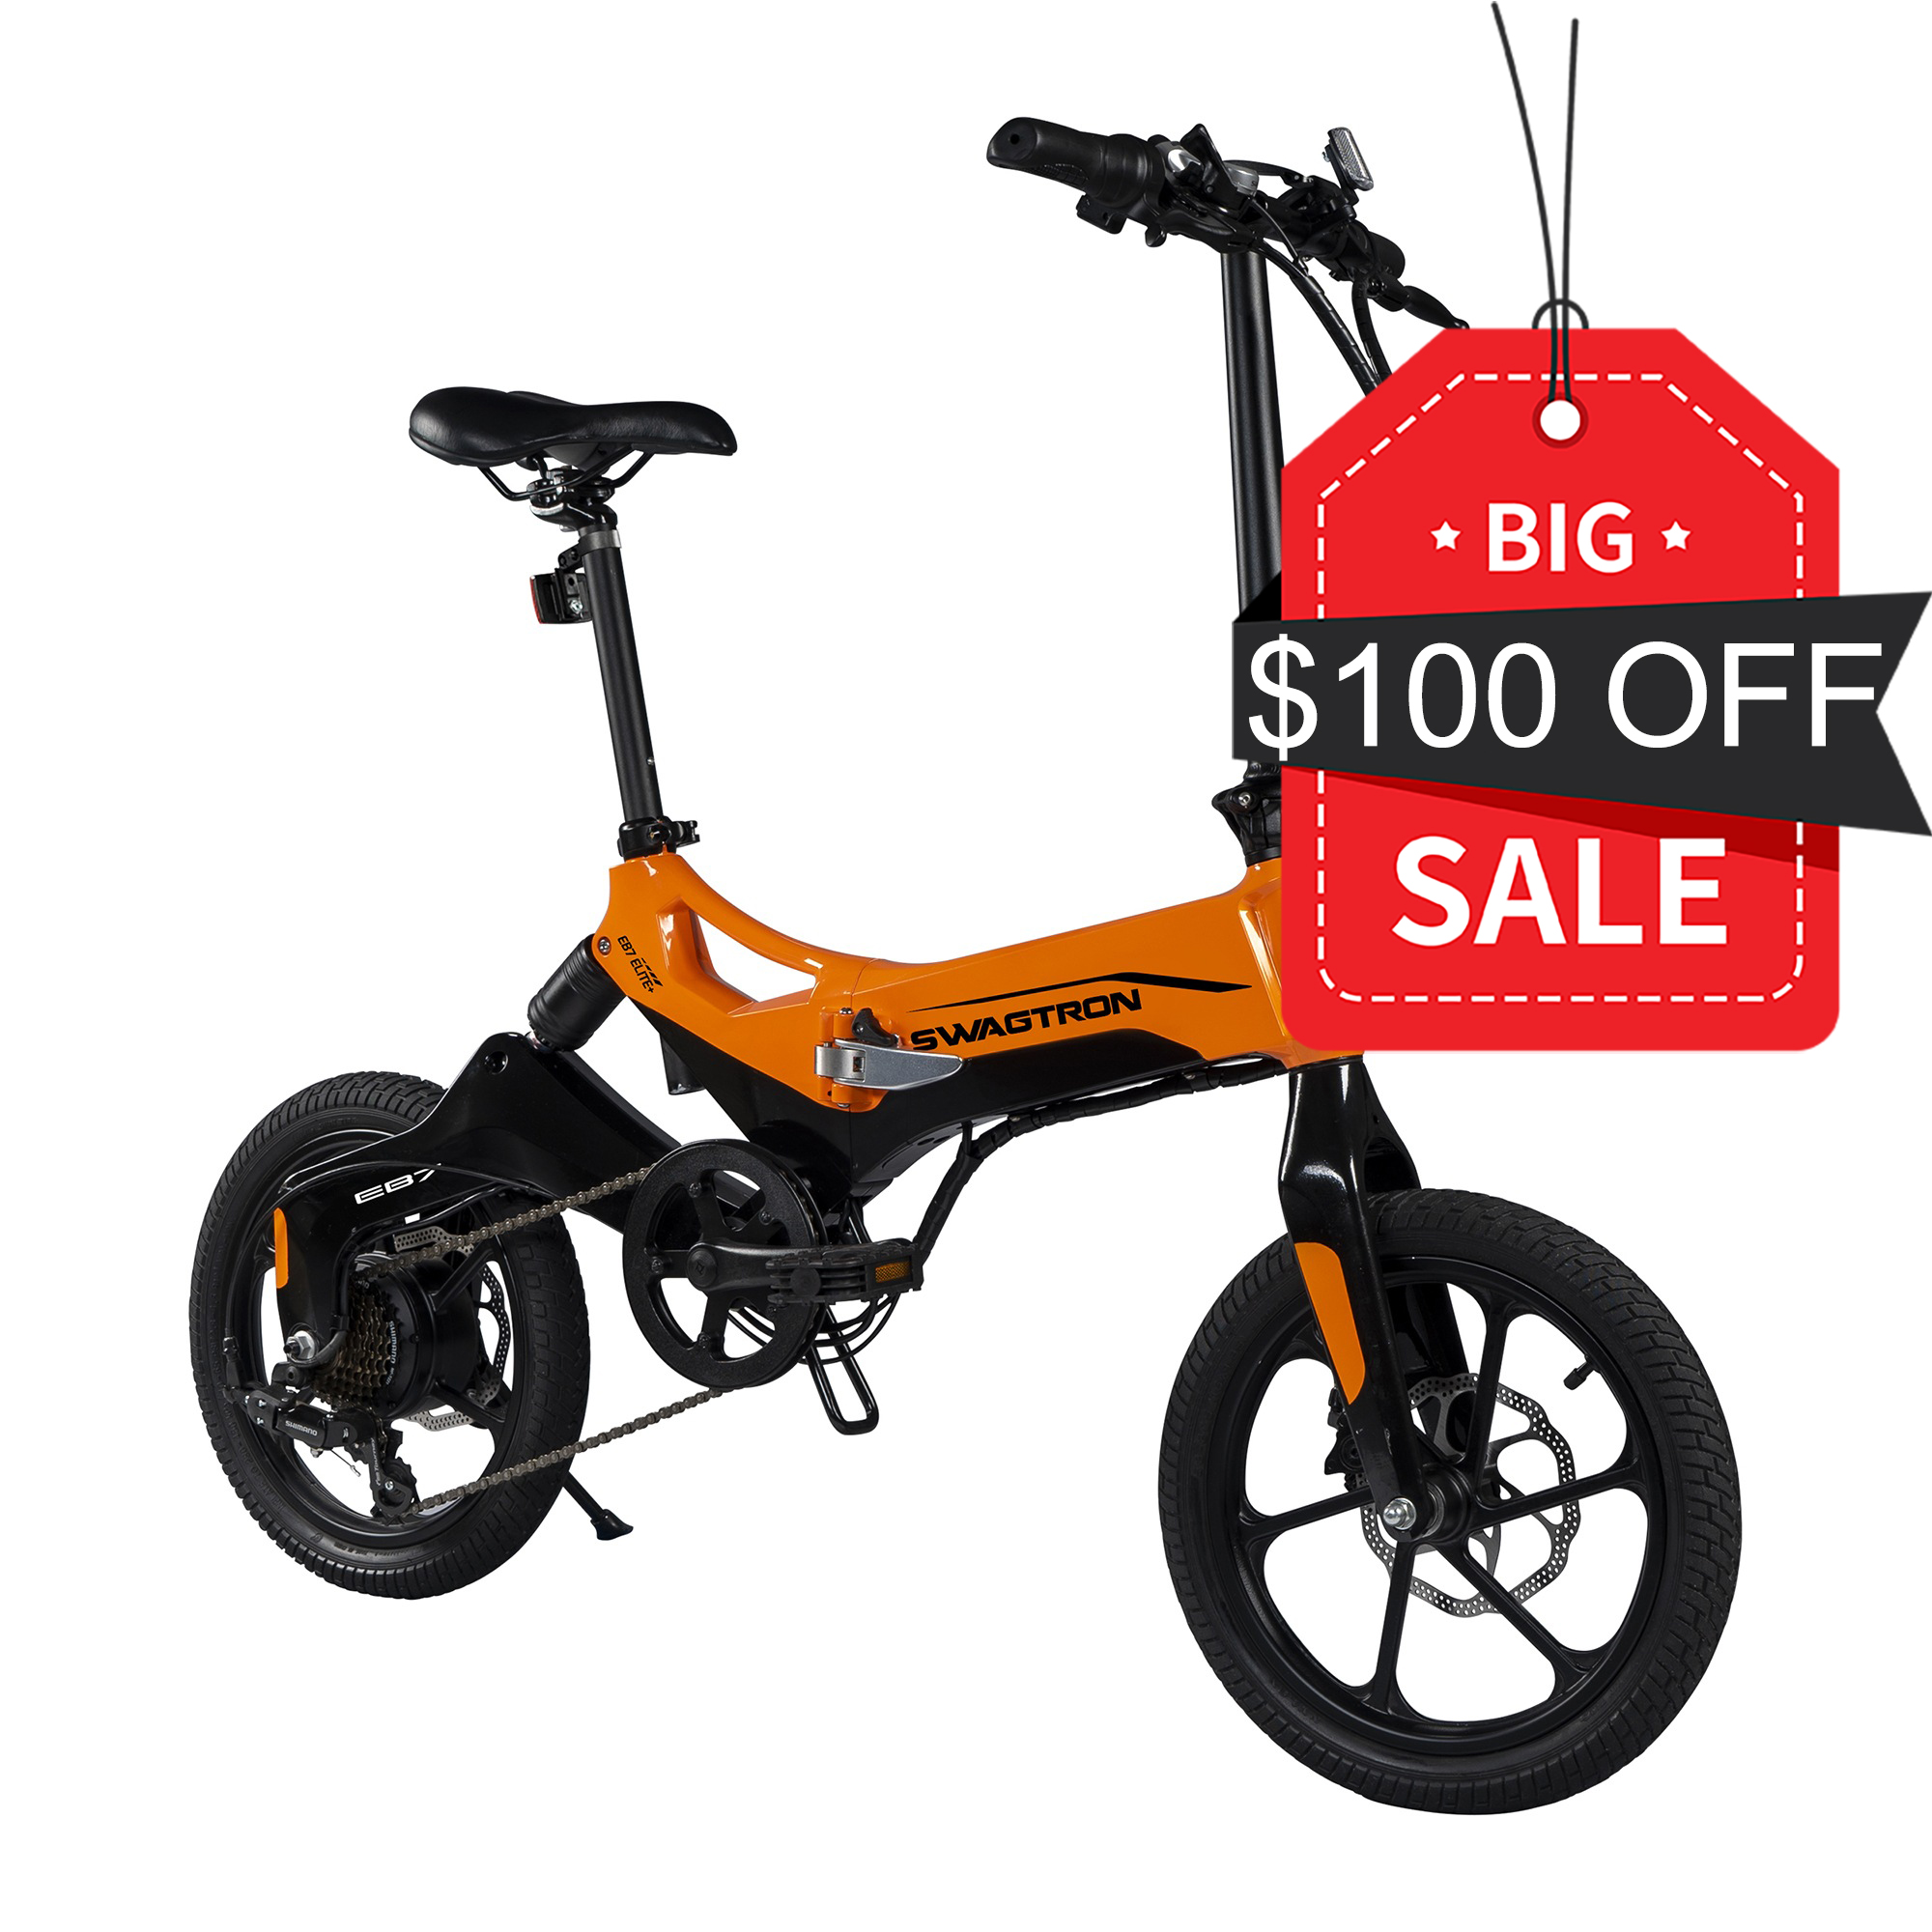 The Best Cyber Monday Electric Bike Deals 2022!